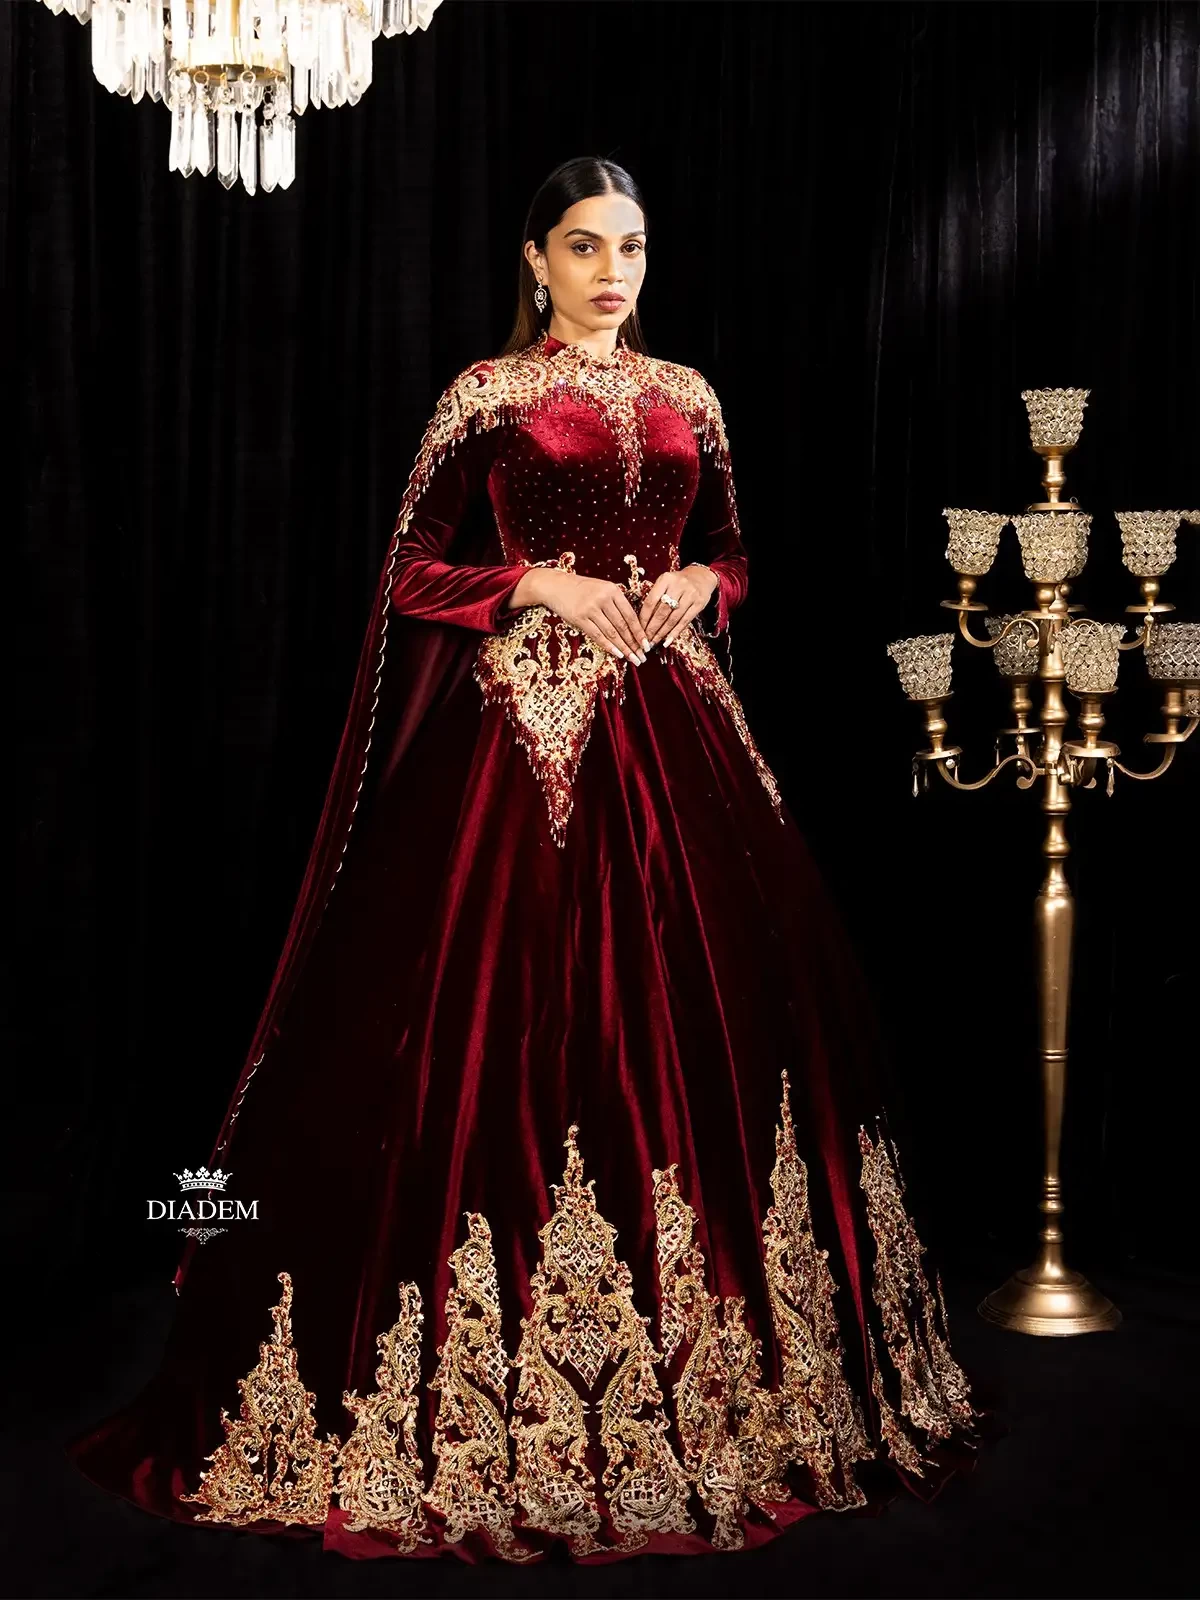 Dark Red Velvet Ball Gown Embellished With Laces And Crystal Beads